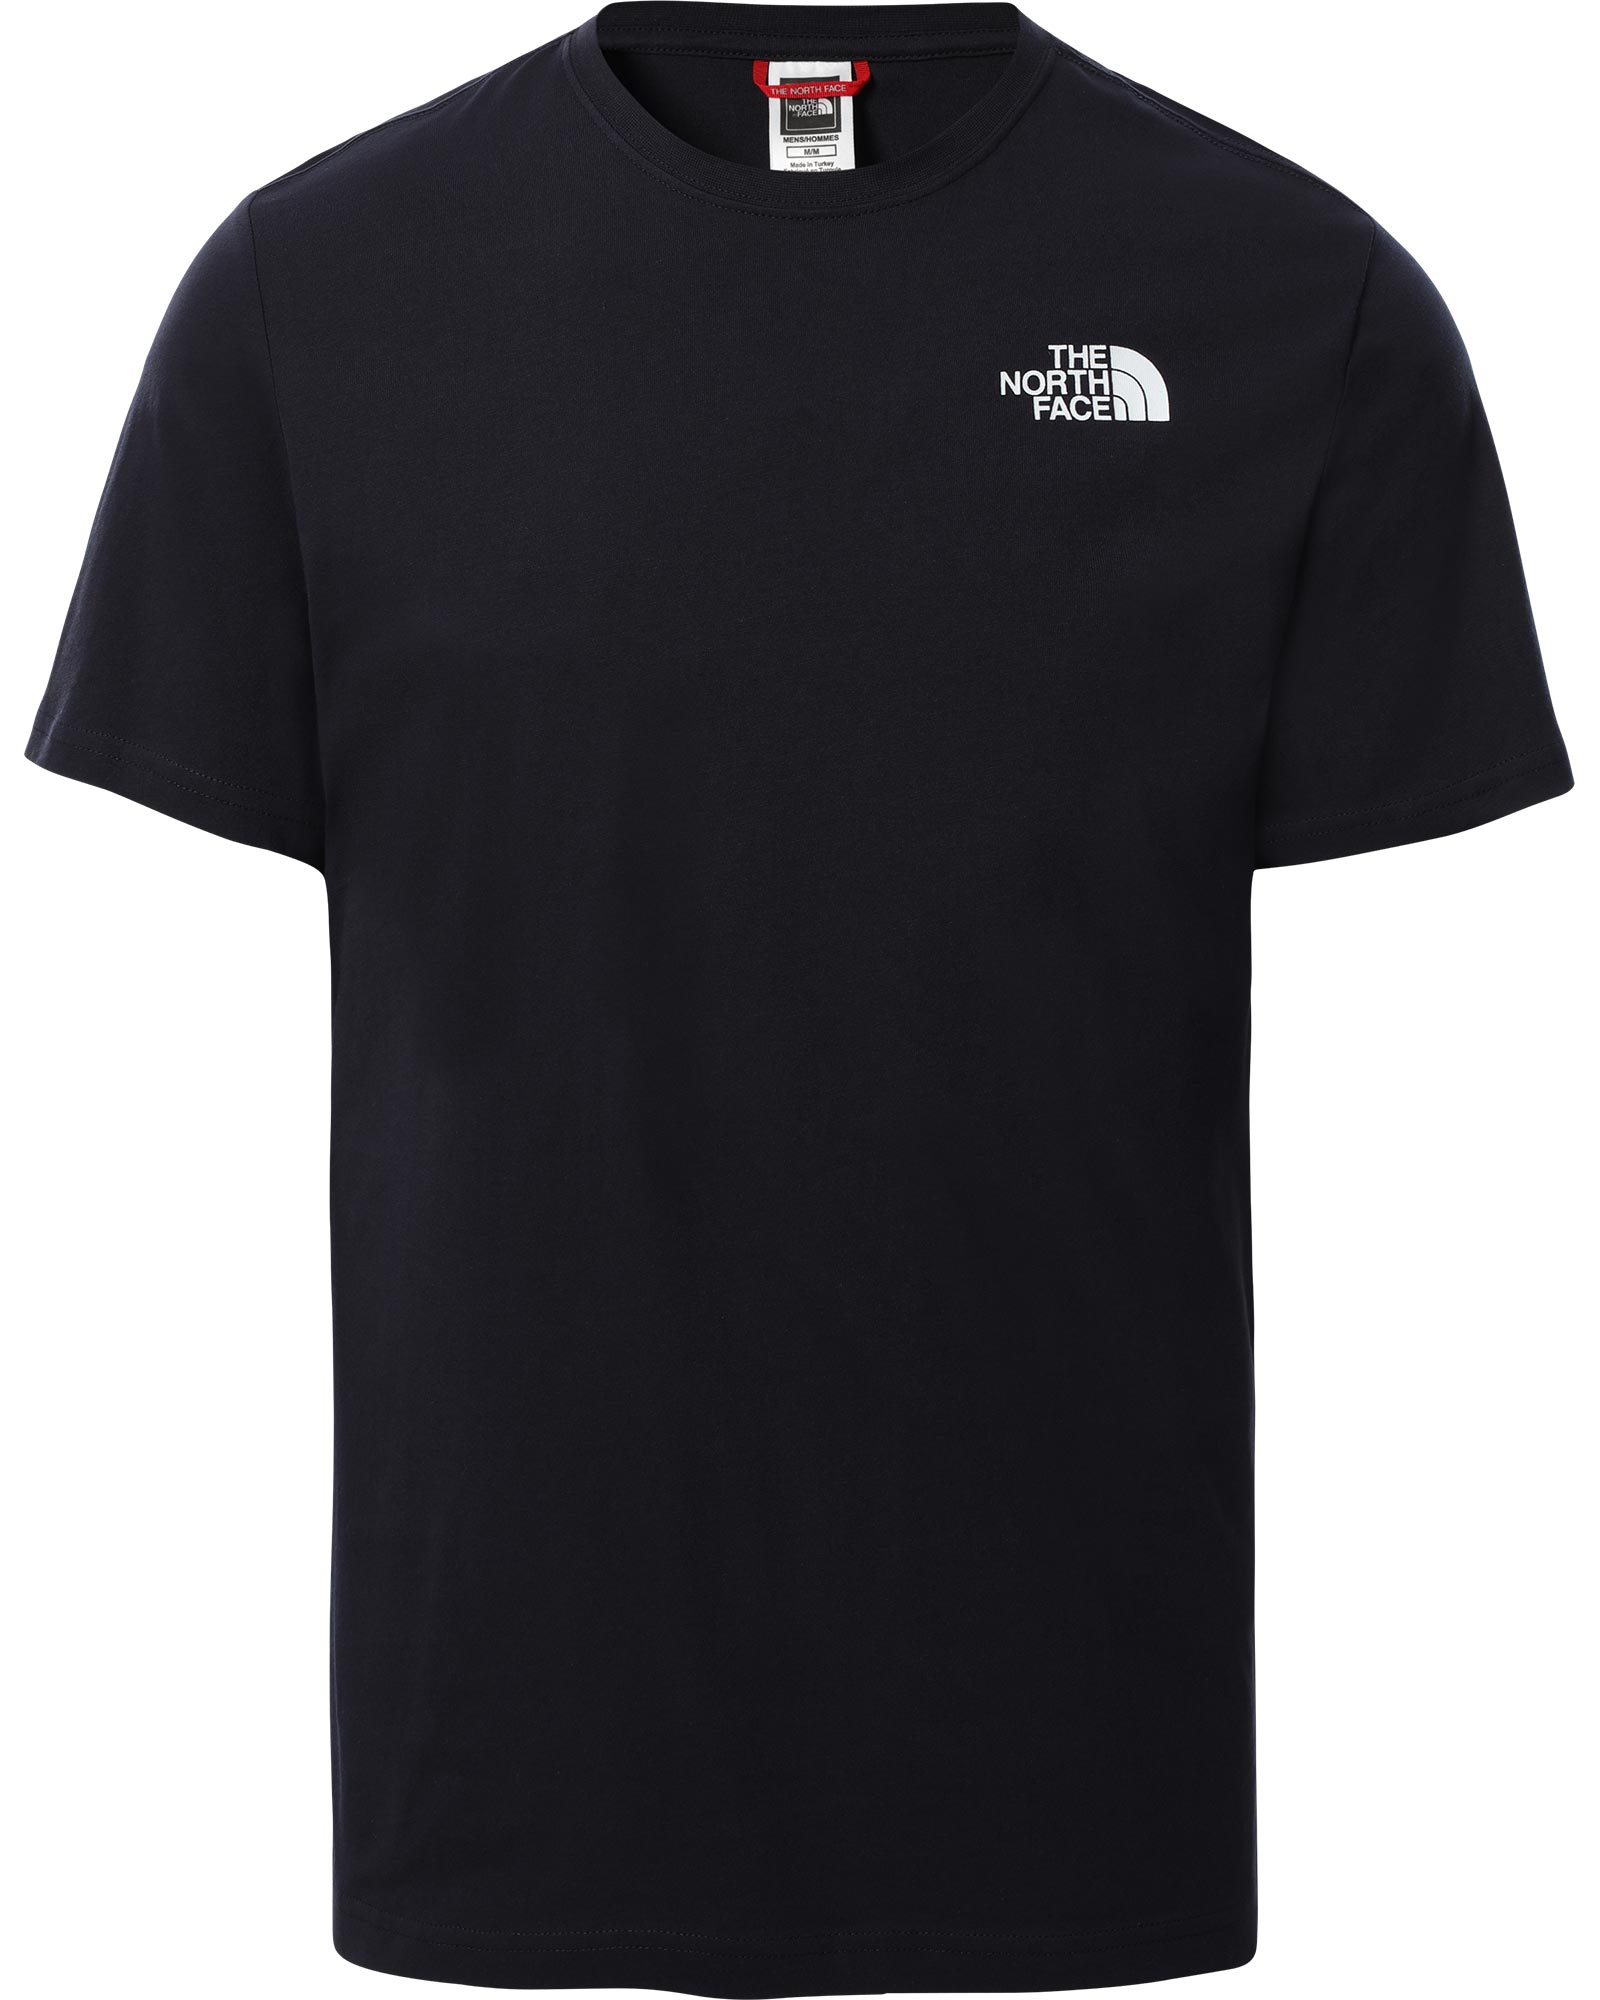 The North Face Red Box Men’s T Shirt - Aviator Navy XS